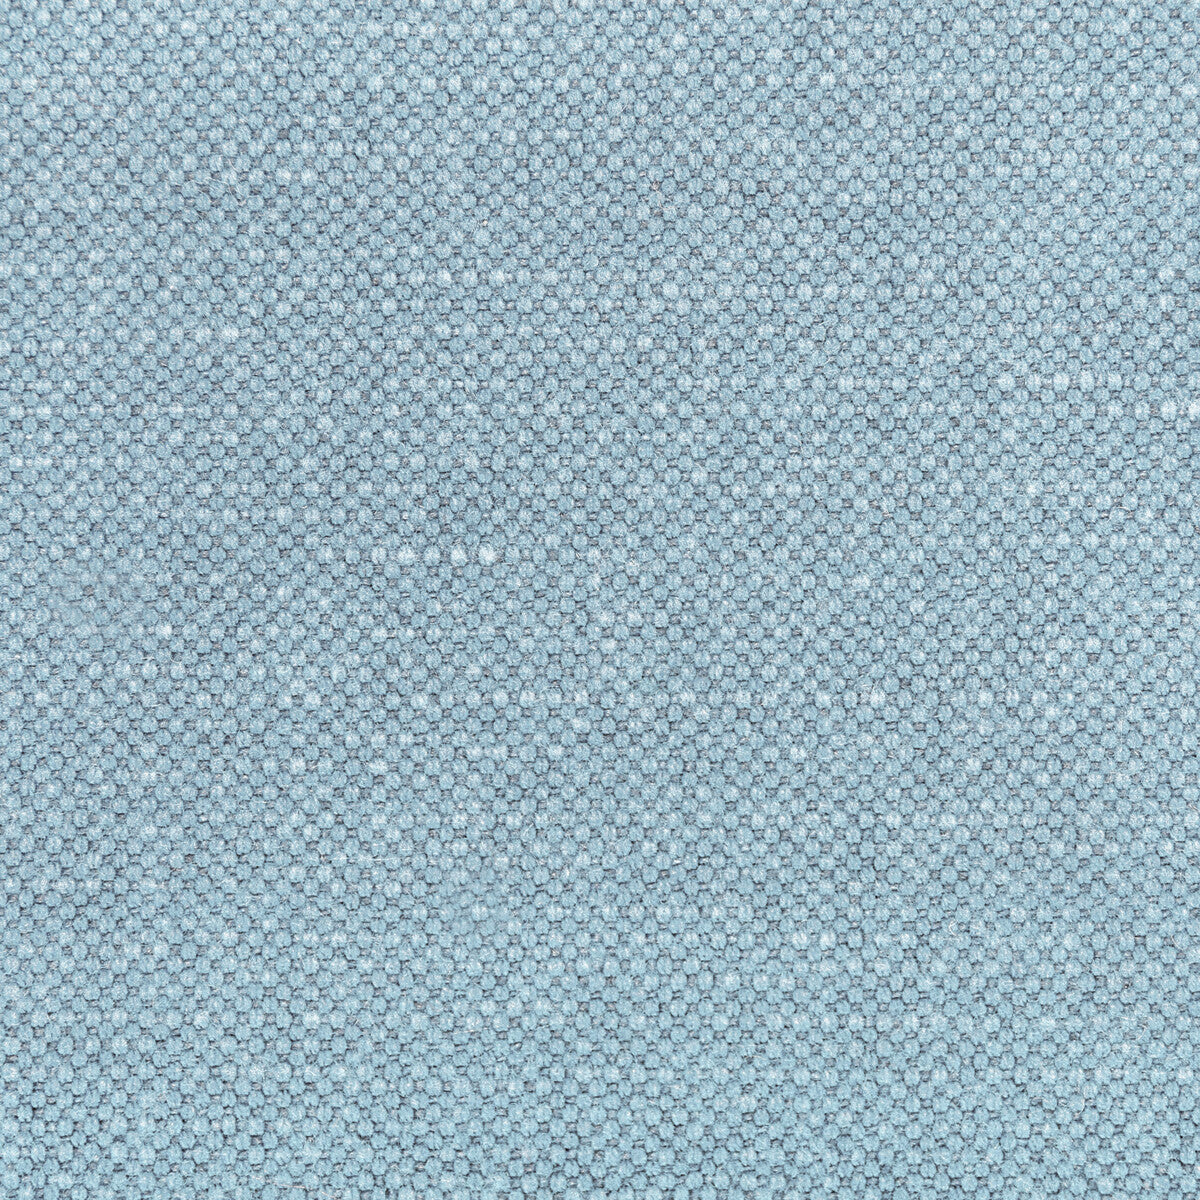 Carson fabric in stream color - pattern 36282.1521.0 - by Kravet Basics